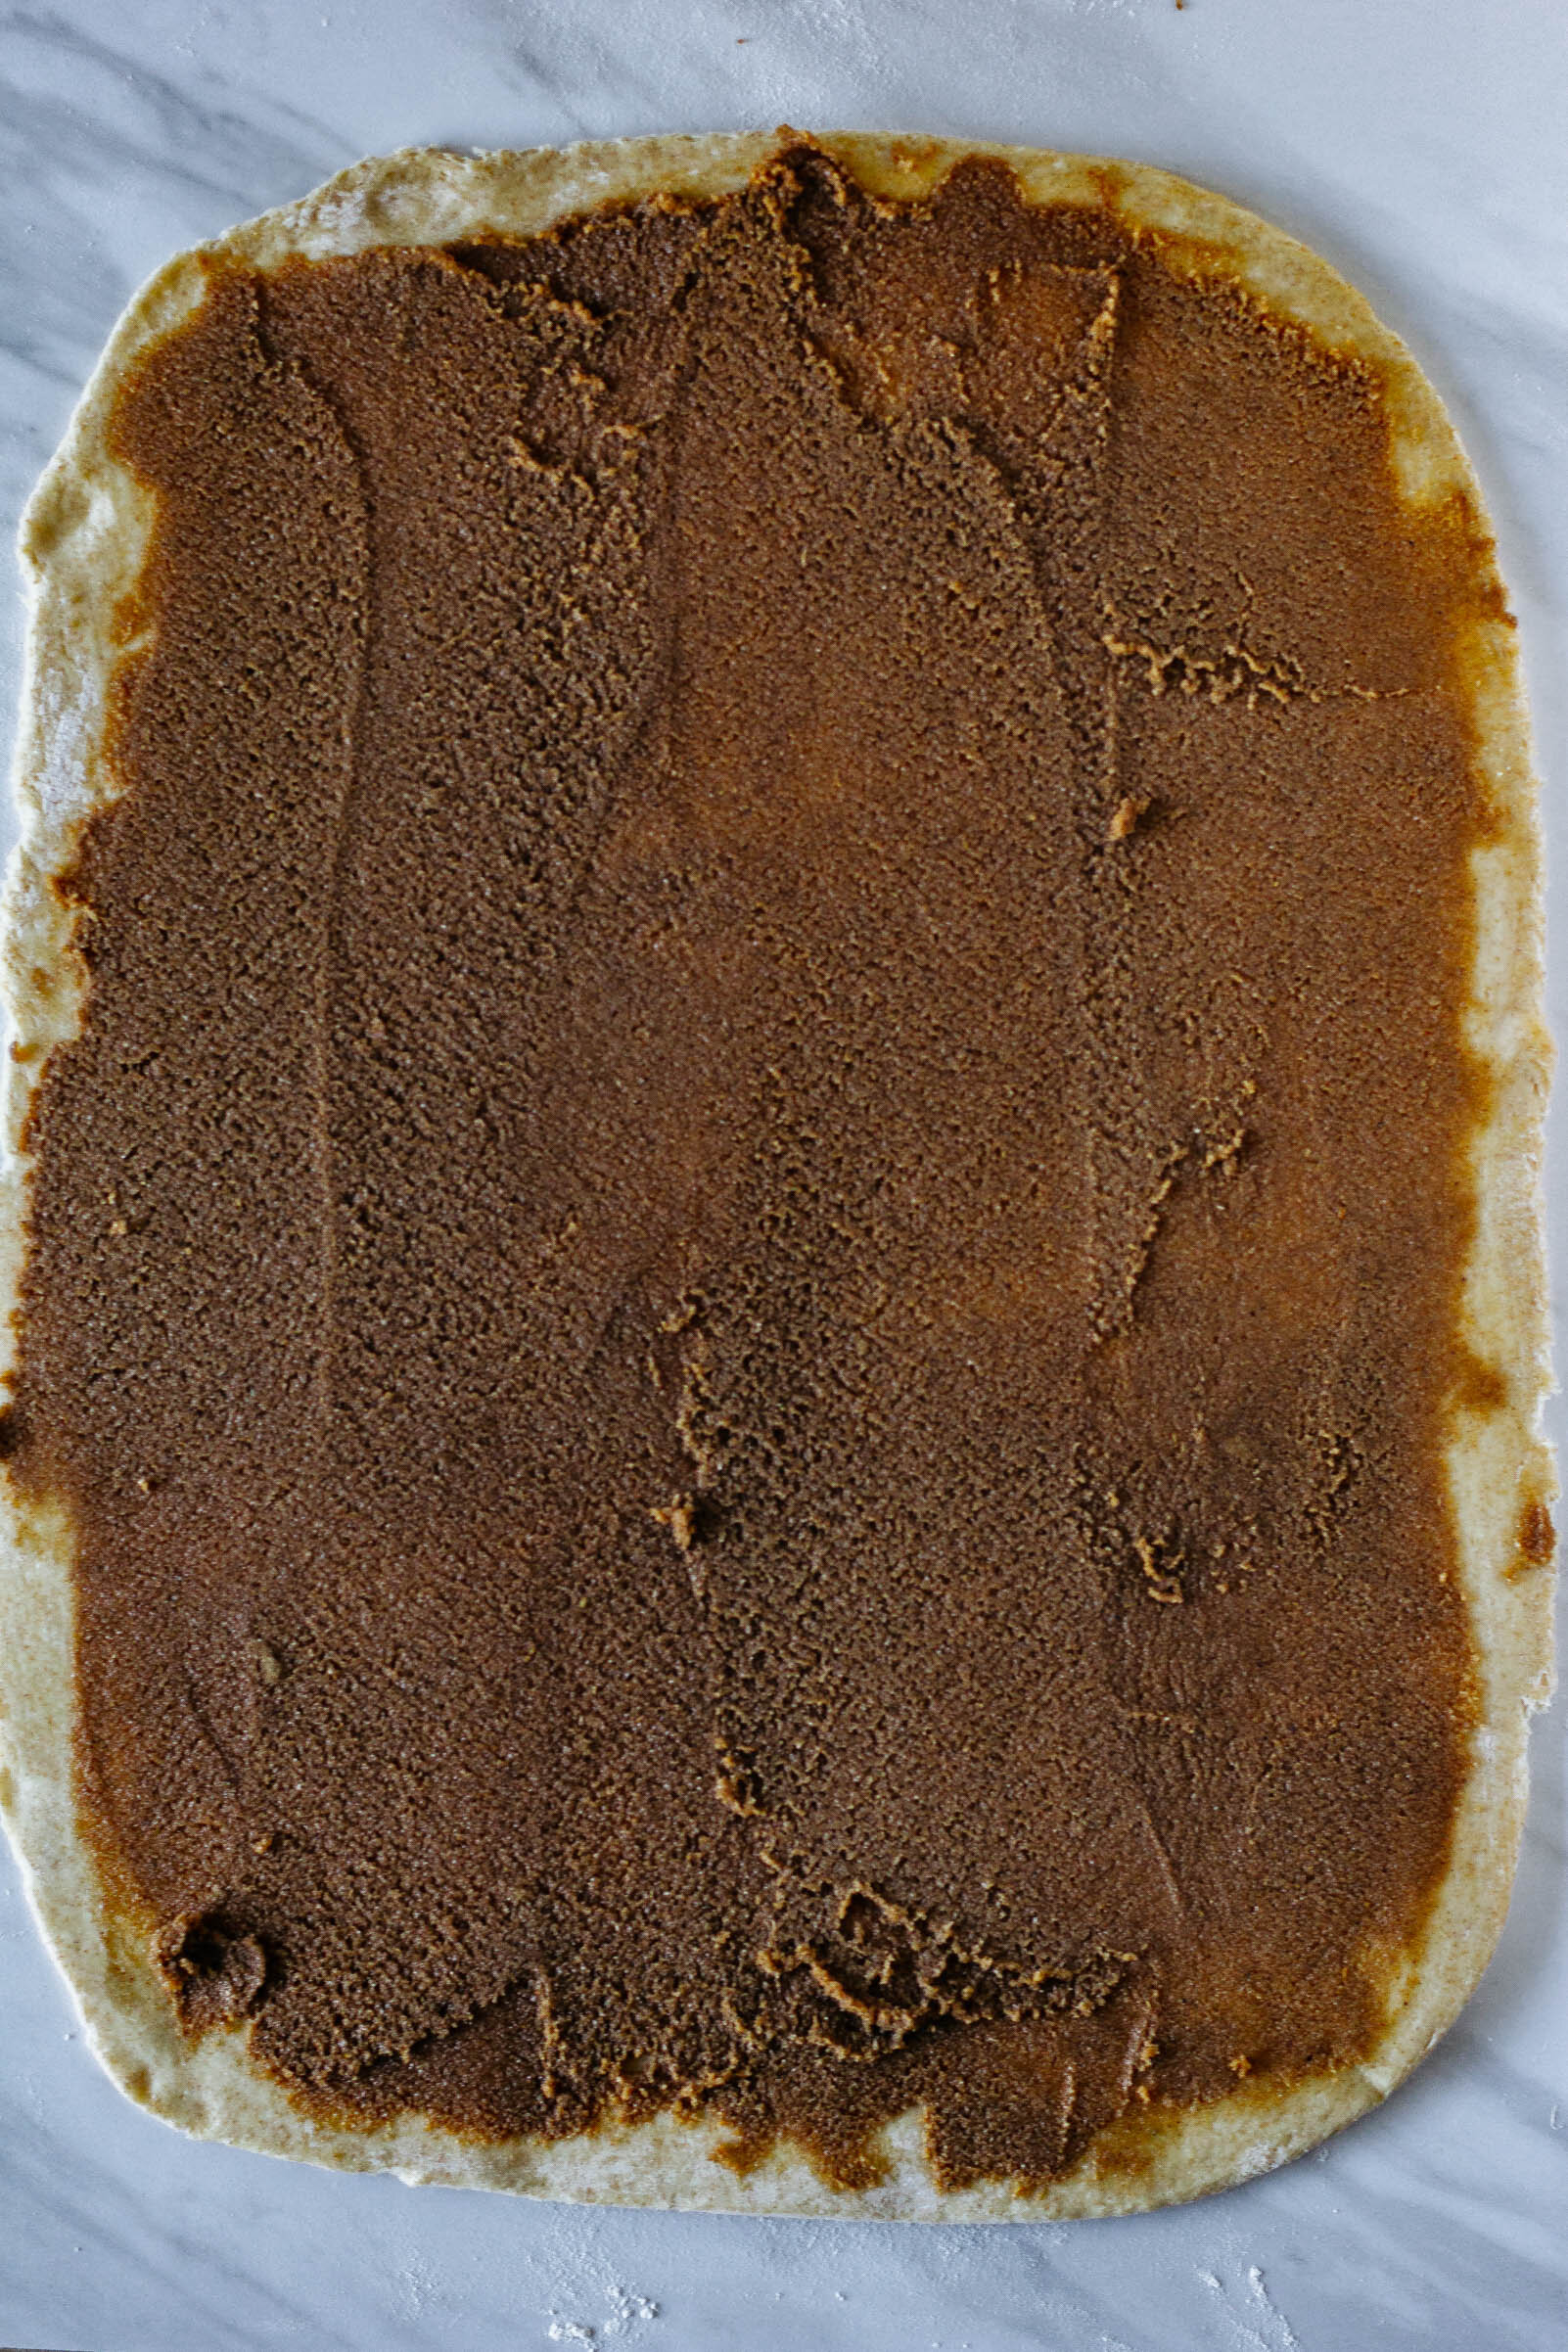 smear surface of the dough with filling